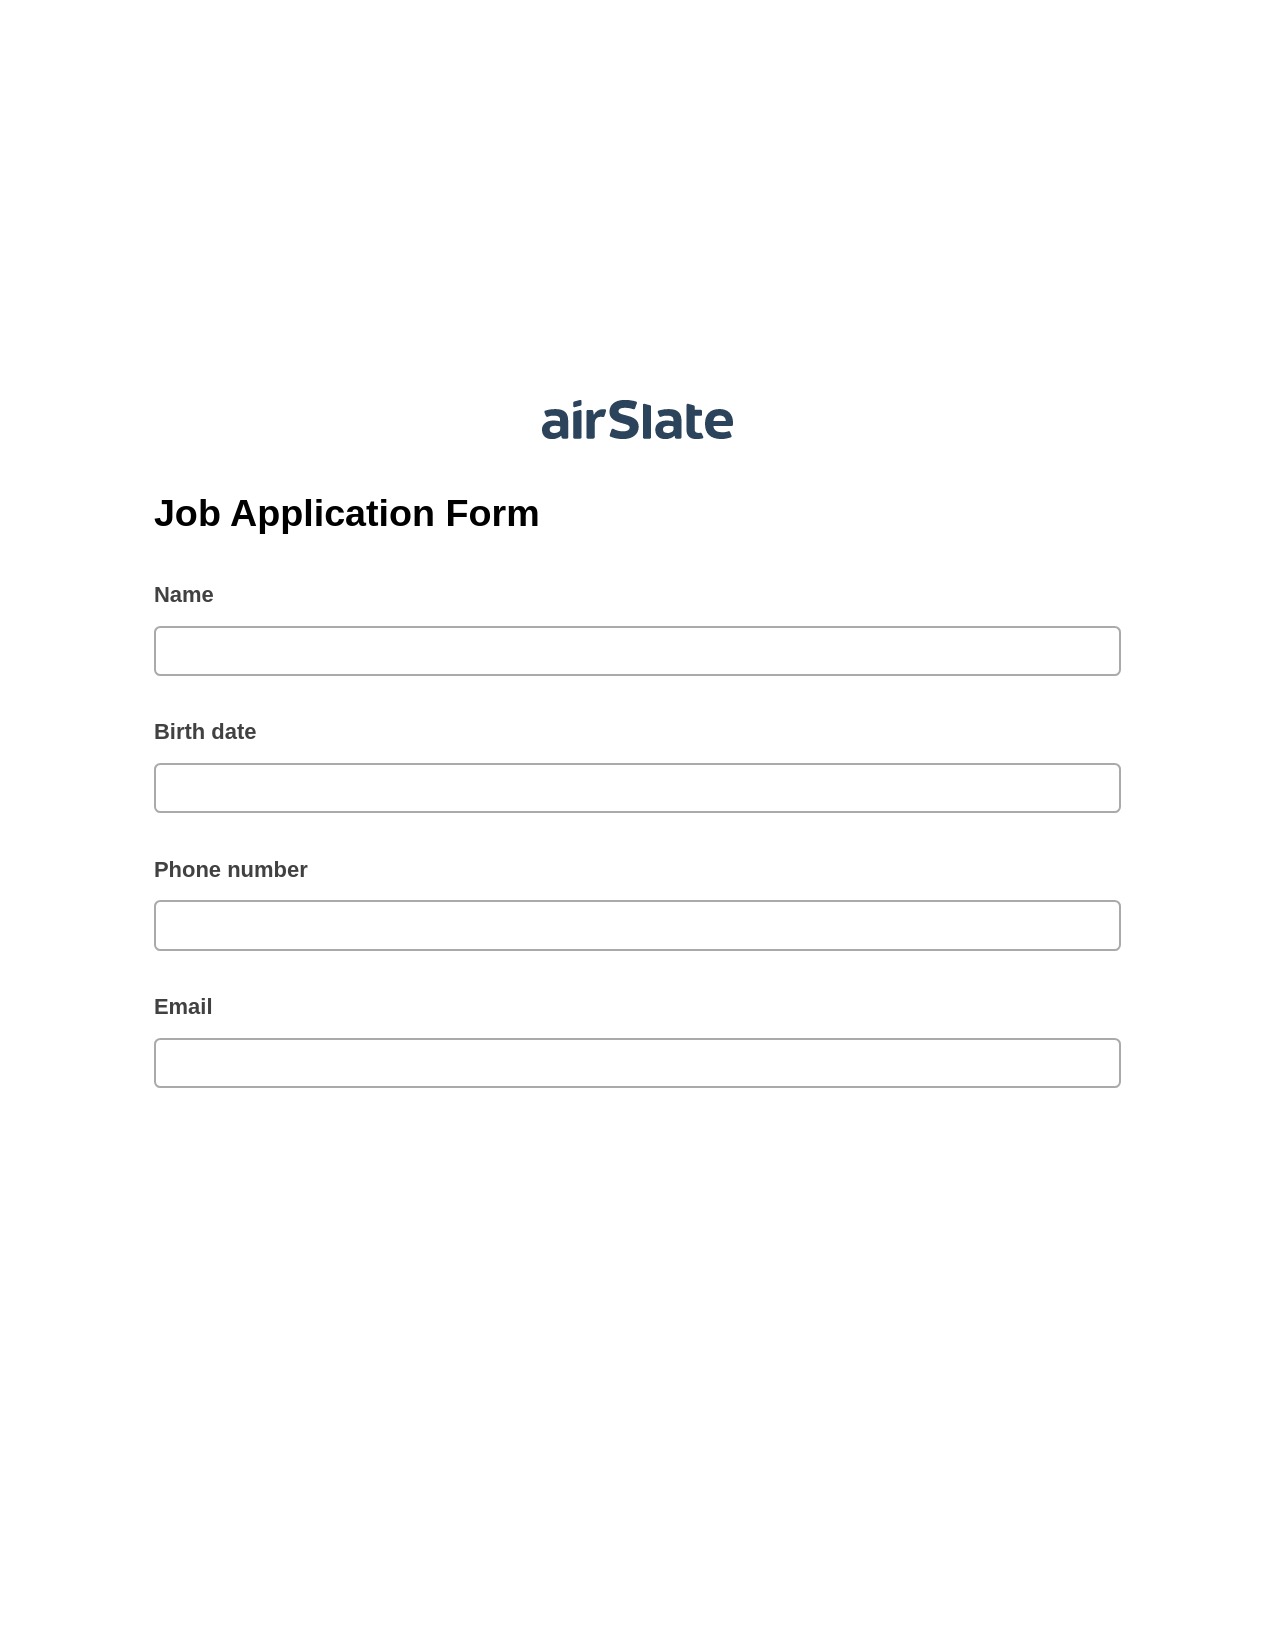 Multirole Job Application Form Pre-fill from AirTable Bot, Update NetSuite Records Bot, Export to NetSuite Record Bot